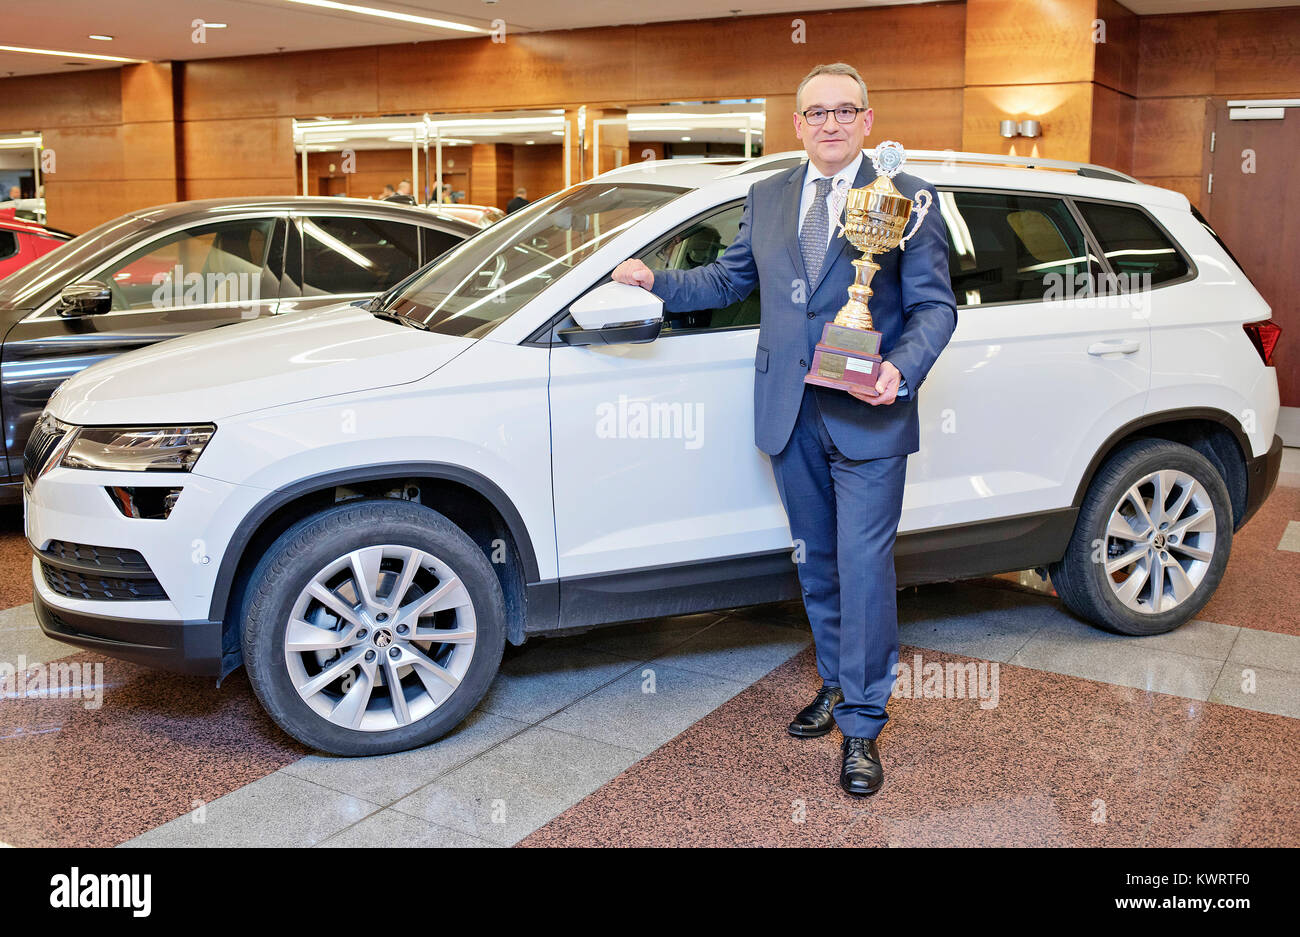 Prague, Czech Republic. 05th Jan, 2018. The head of Skoda's sales organisation for the Czech Republic Lubos Vlcek presents the trophy as the Skoda Karoq has won the Car of the Year 2018 title in the Czech Republic, beating the BMW 5 Series, Opel Insignia, Kia Stinger and Subaru Impreza in the competition today, on Friday, January 5, 2018. Credit: Rene Fluger/CTK Photo/Alamy Live News Stock Photo